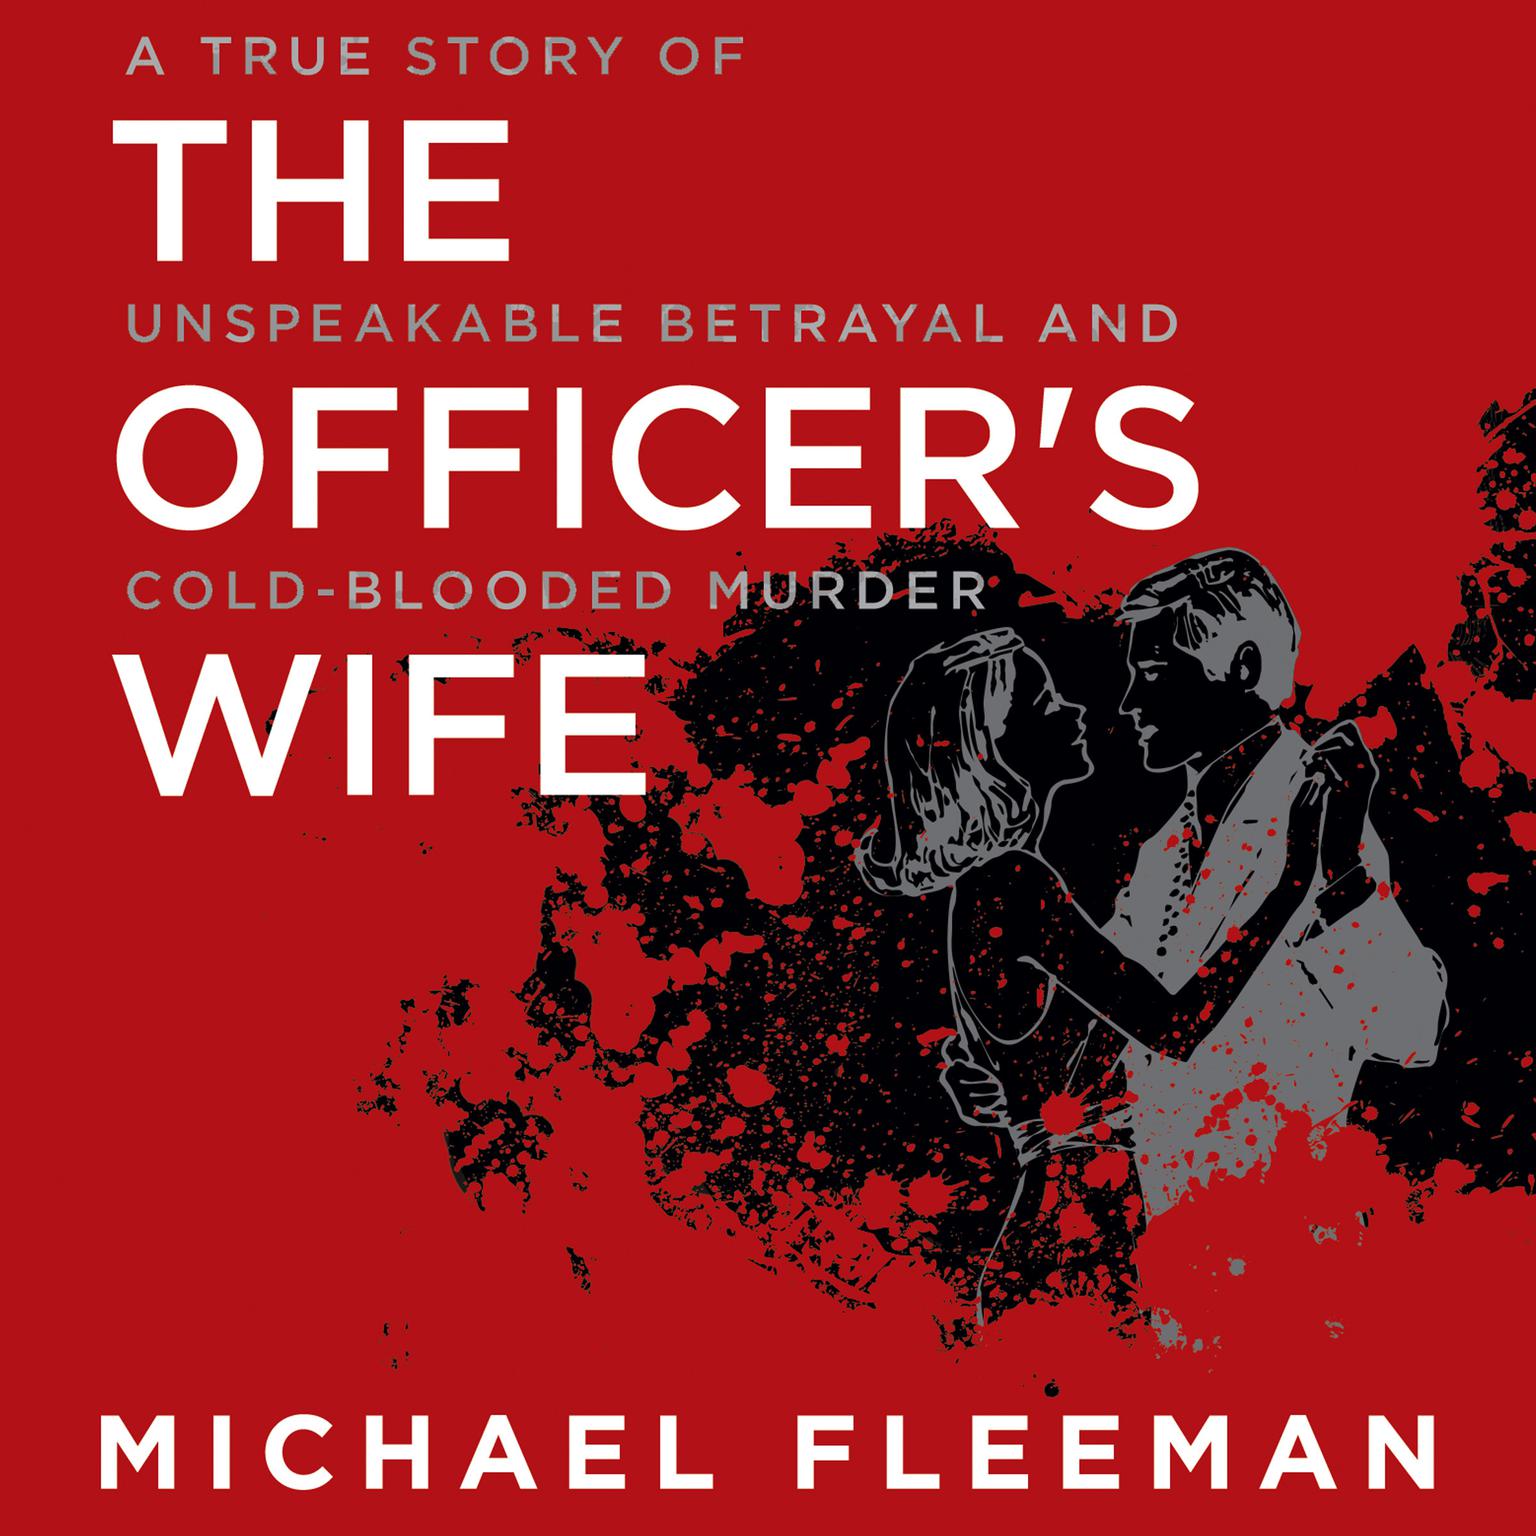 The Officers Wife: A True Story of Unspeakable Betrayal and Cold-Blooded Murder Audiobook, by Michael Fleeman